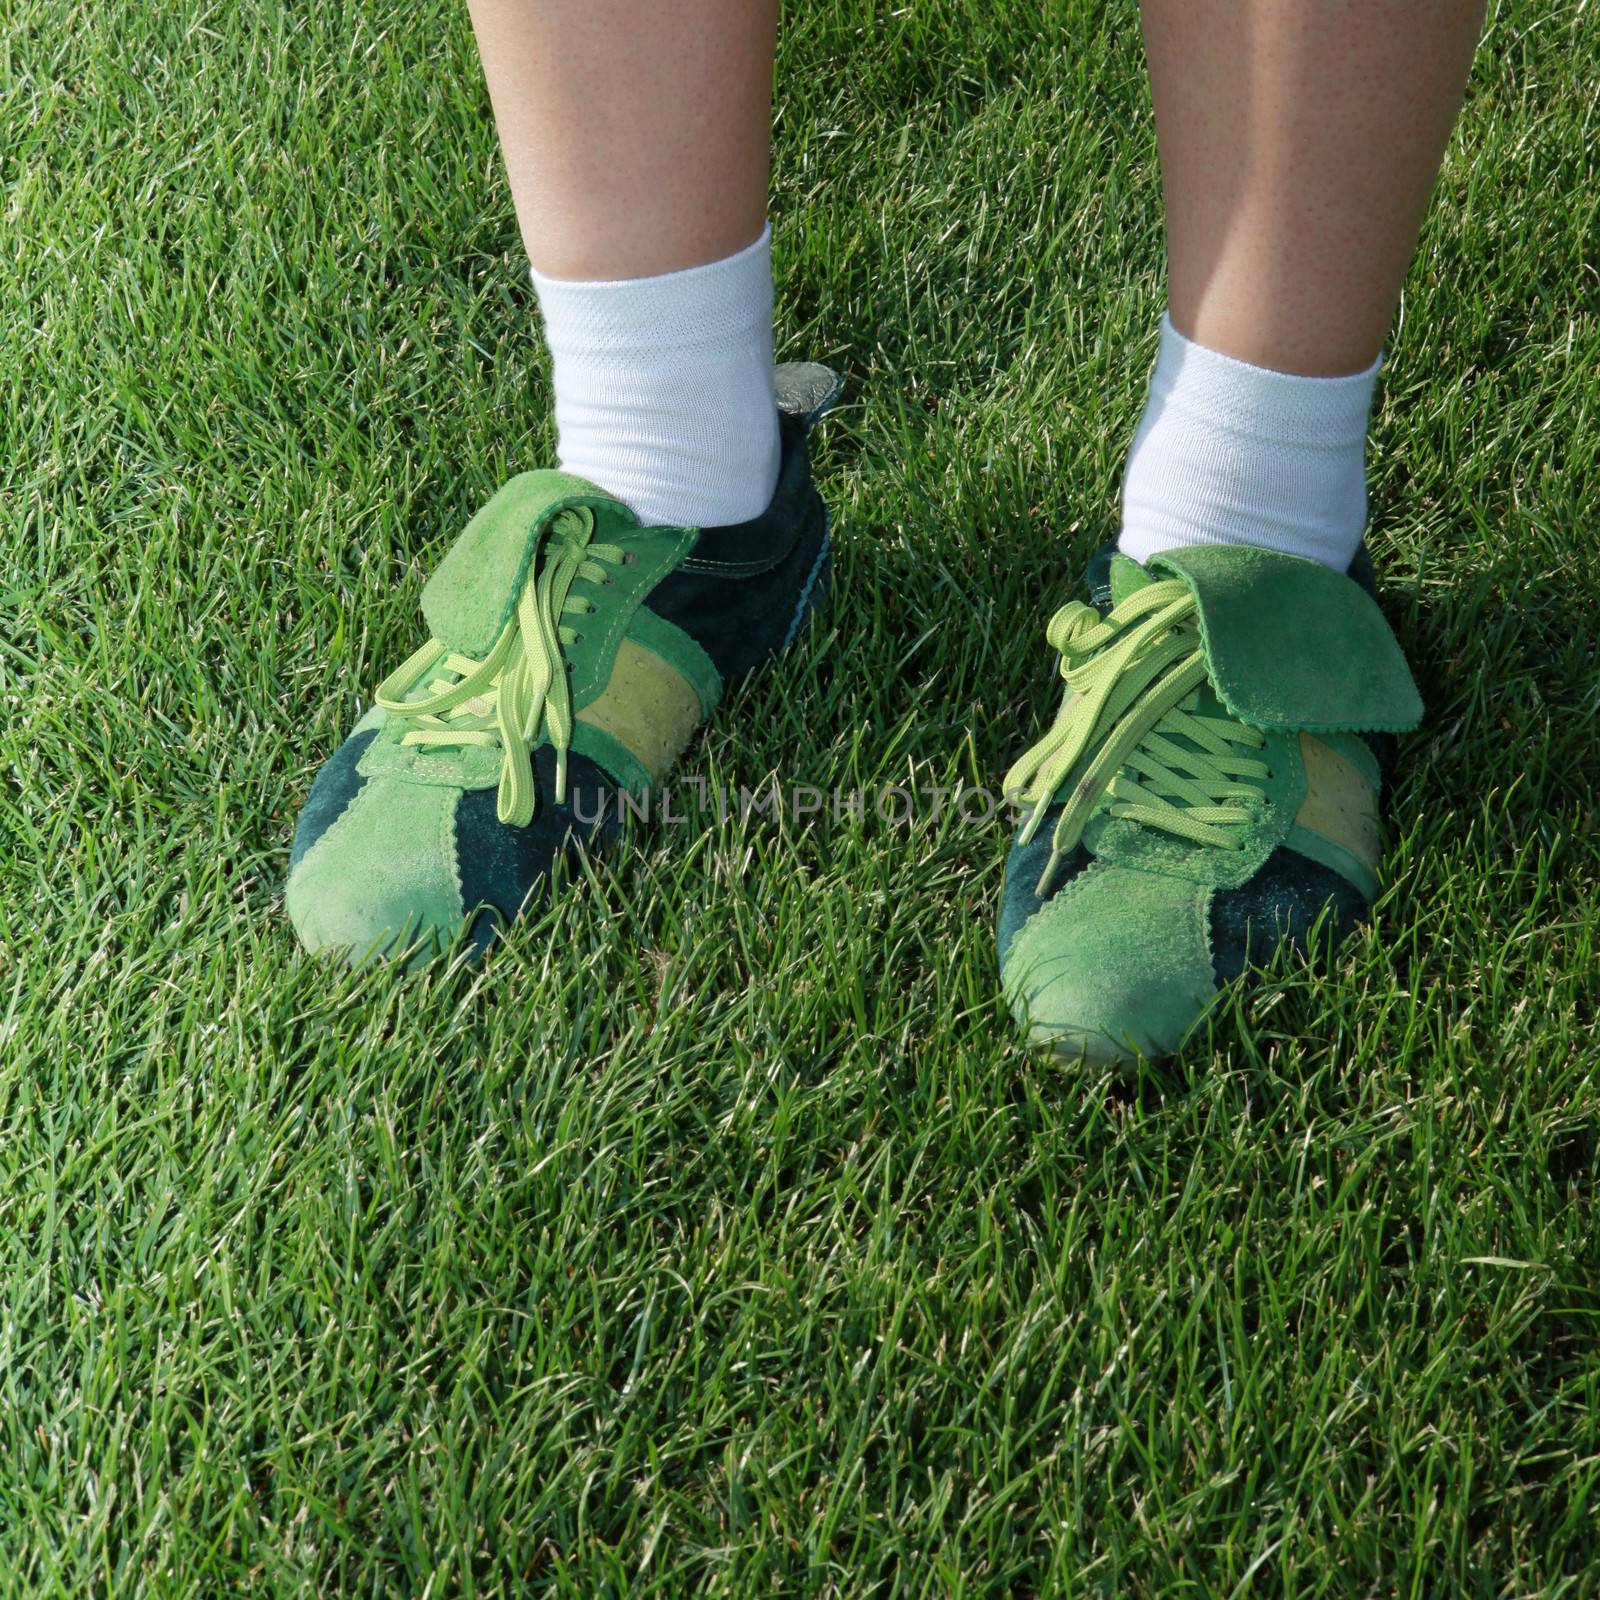 feet of woman dressed in green sports shoes on grass